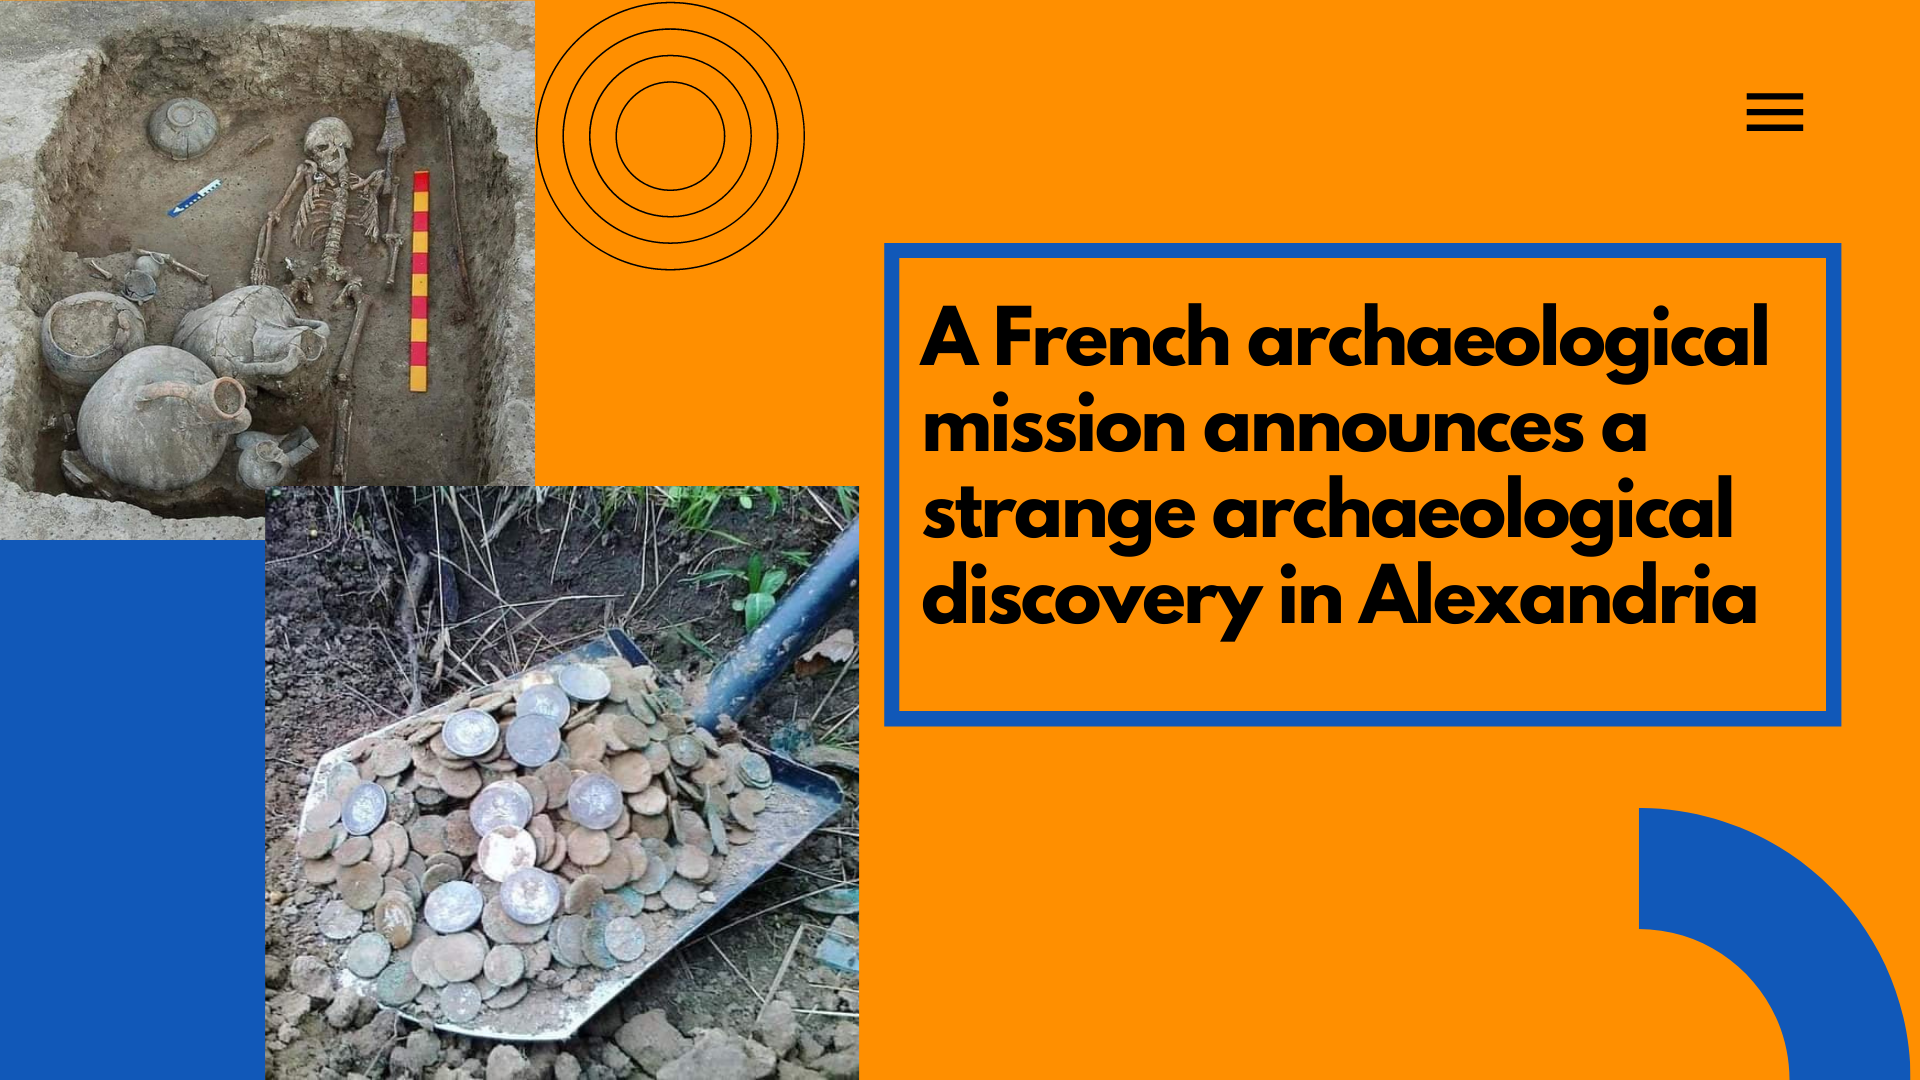 A French archaeological mission announces a strange archaeological discovery in Alexandria